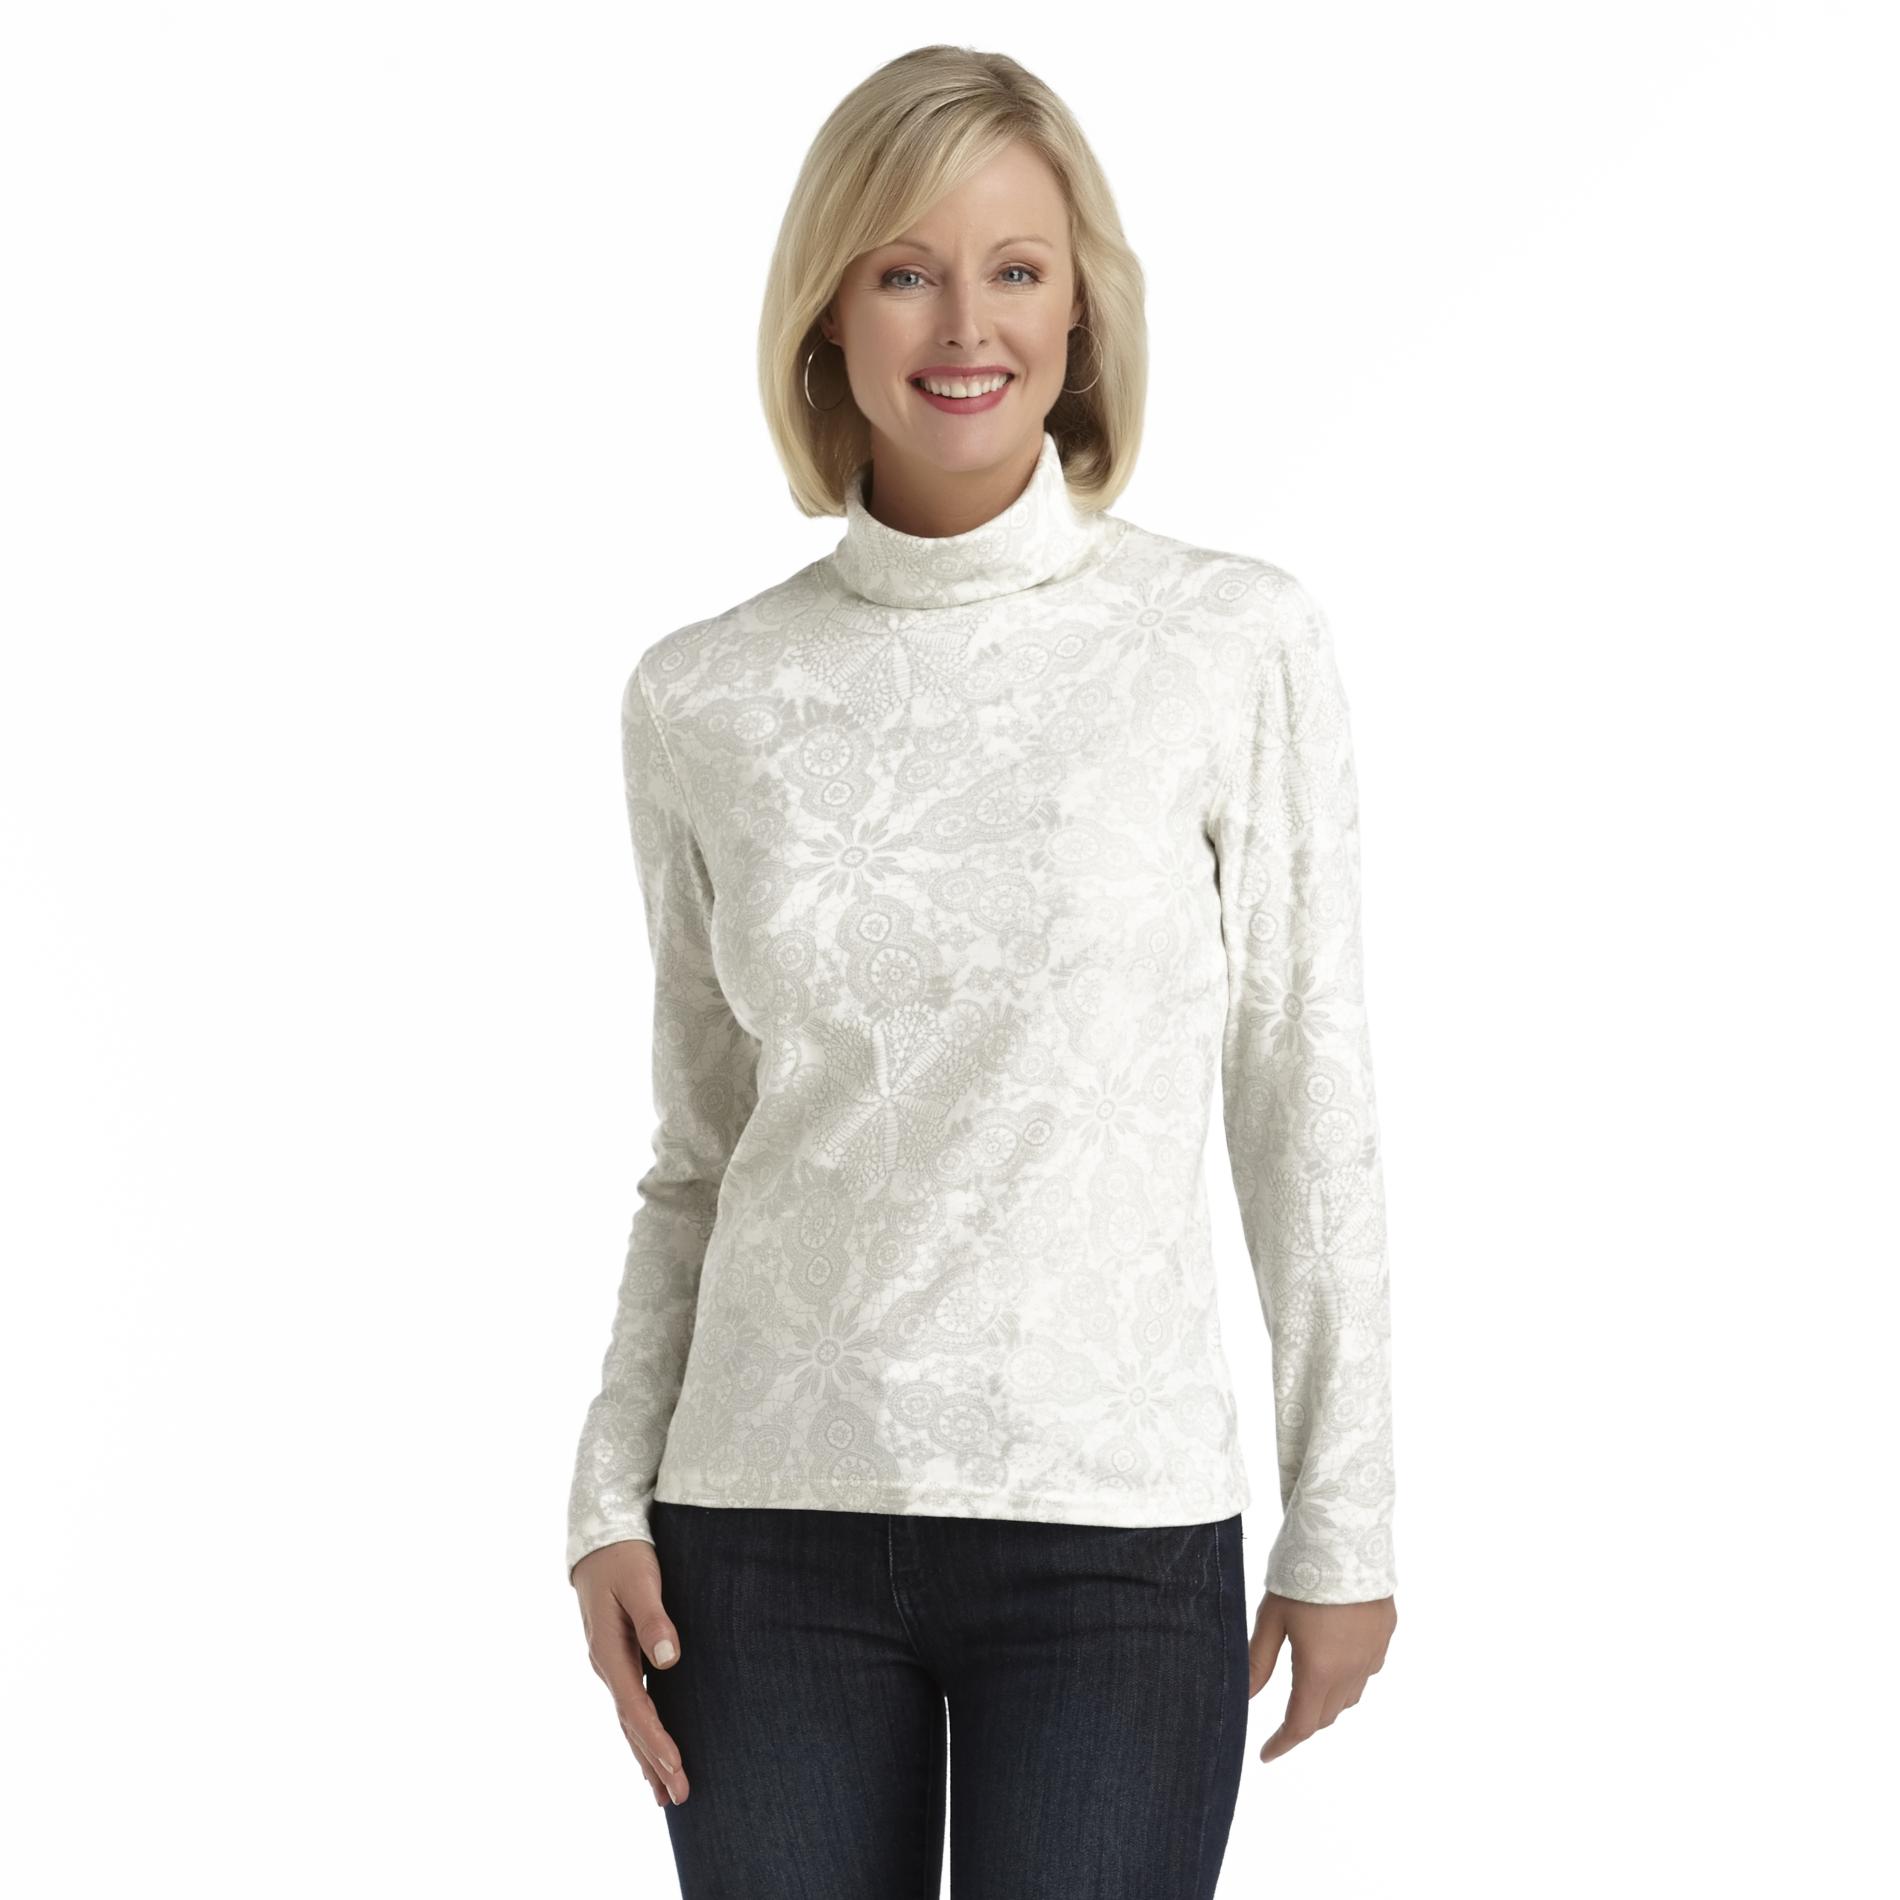 Holiday Editions Women's Cotton Turtleneck - Snowflake